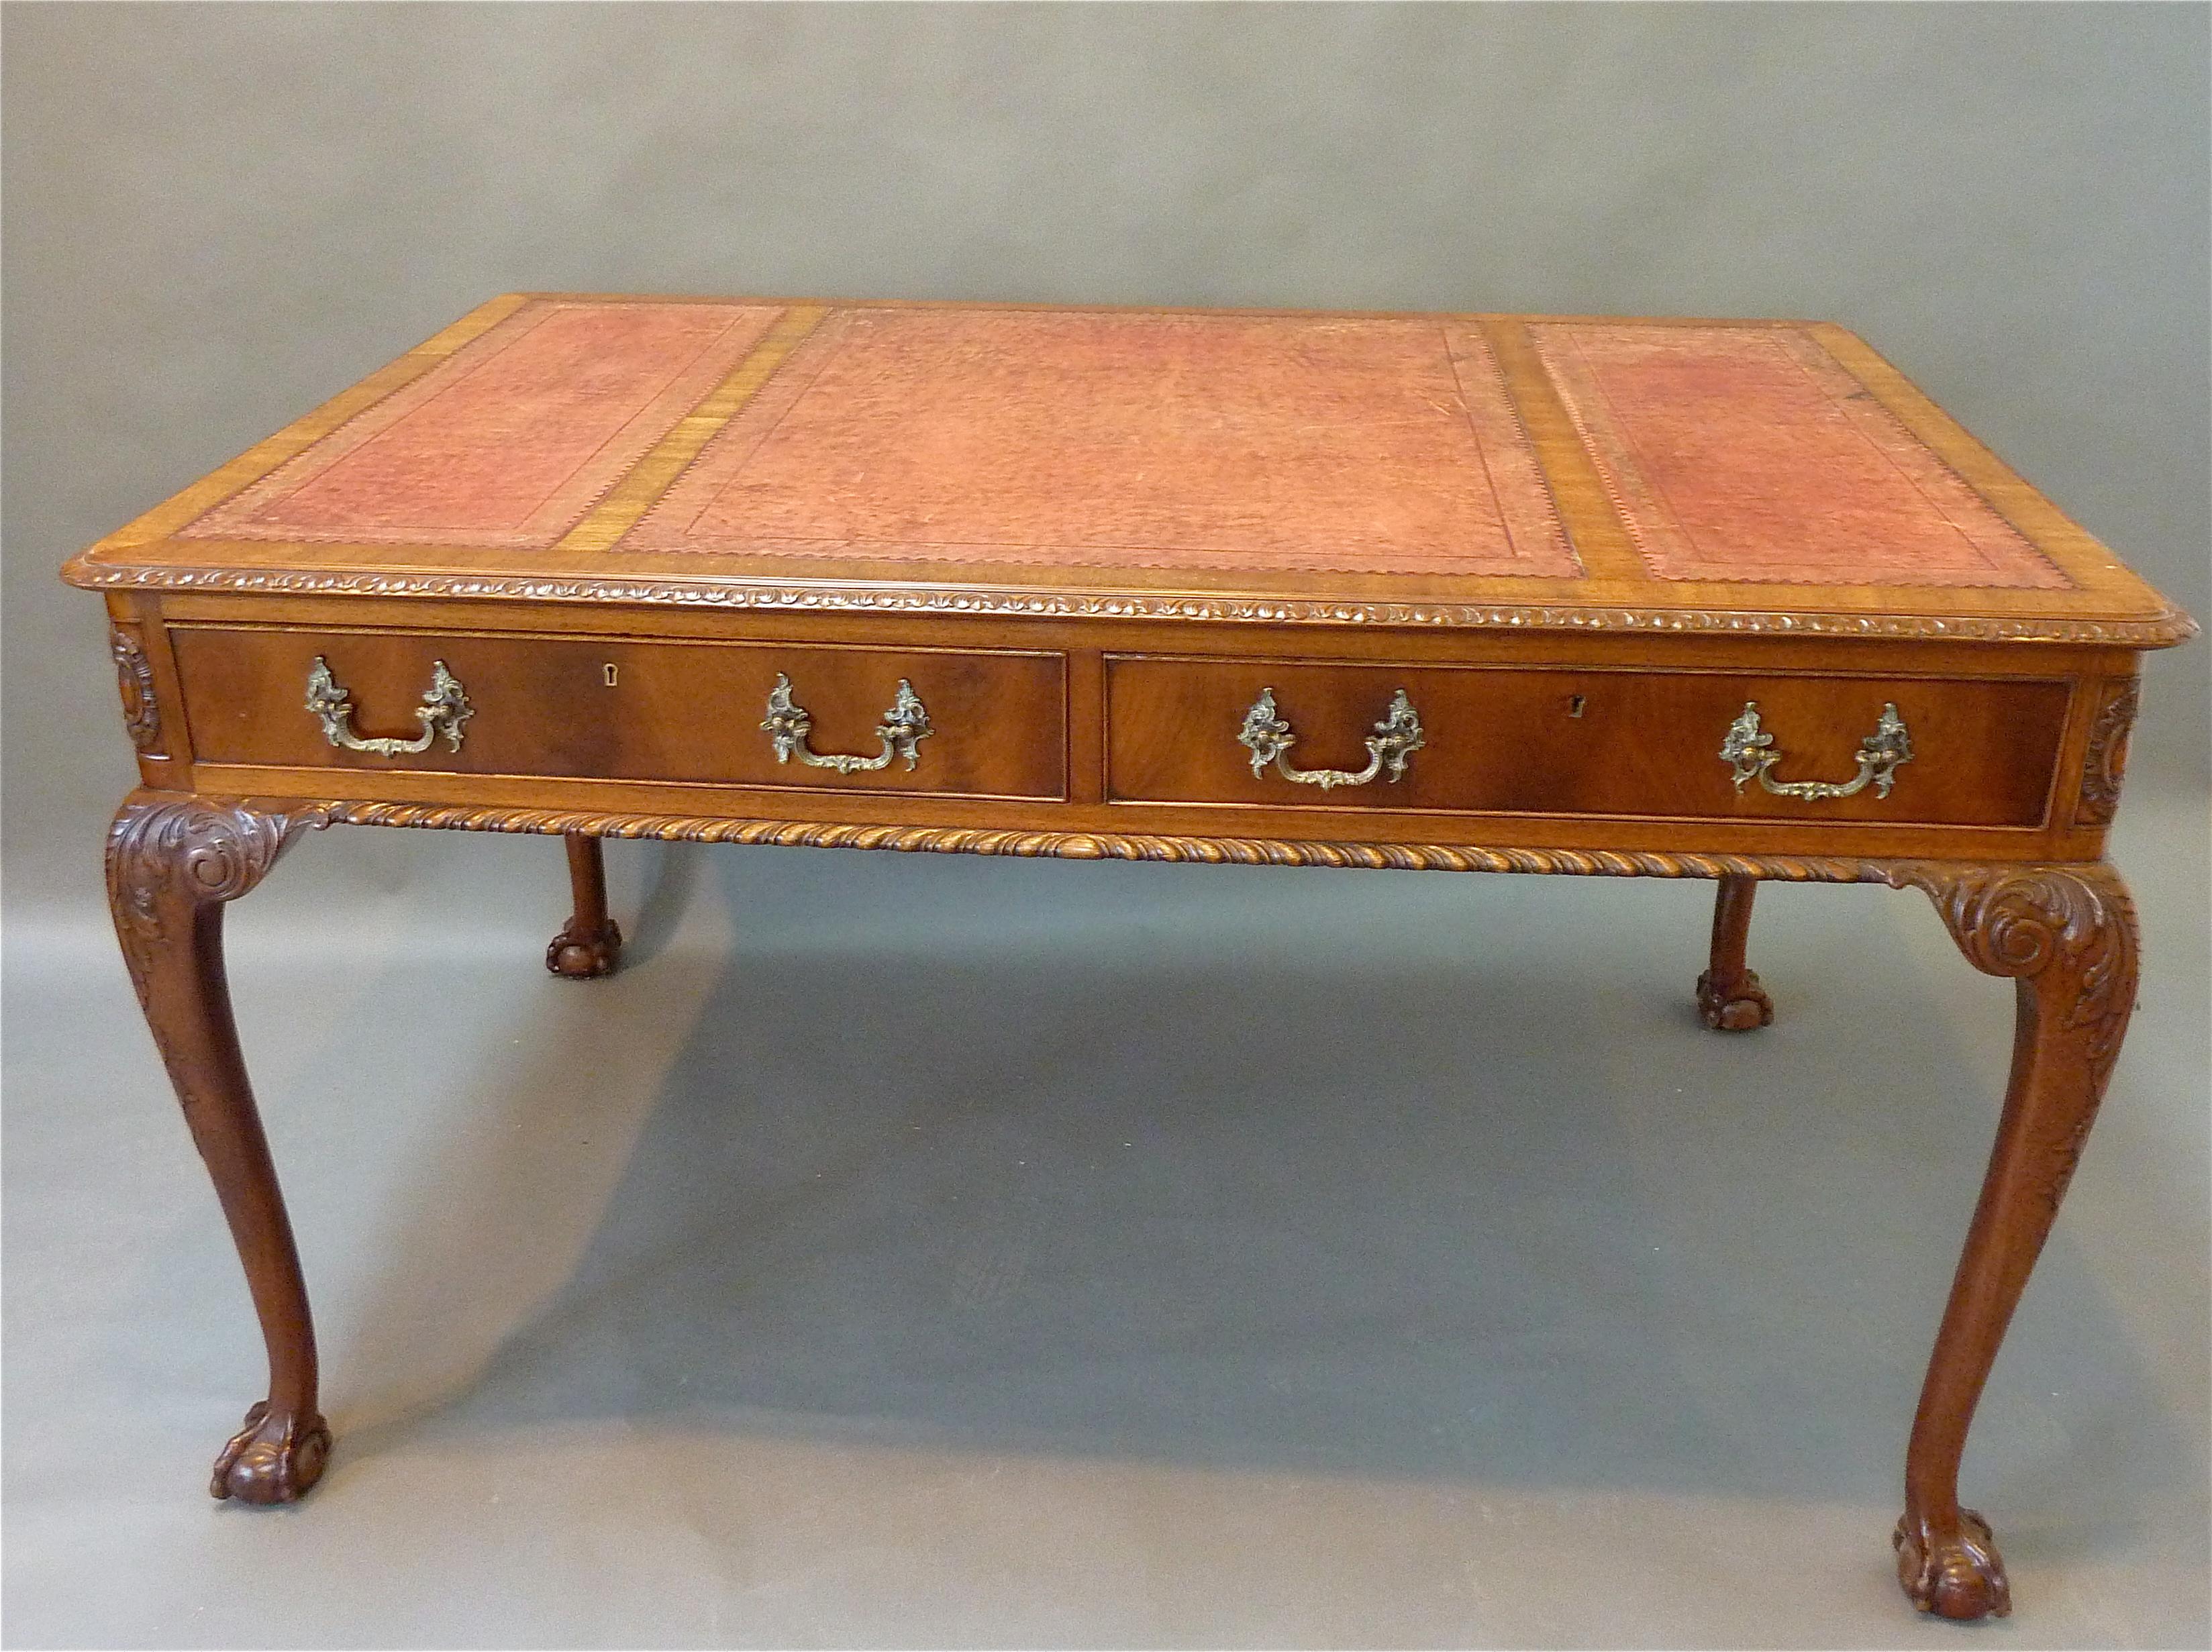 Made of Honduras mahogany with a rich faded patina. Original hand tooled and gilded red leather top with finely carved surrounding molding. Two “bookmatched” drawers retaining the original brass handles over boldly shaped cabriole legs with carved